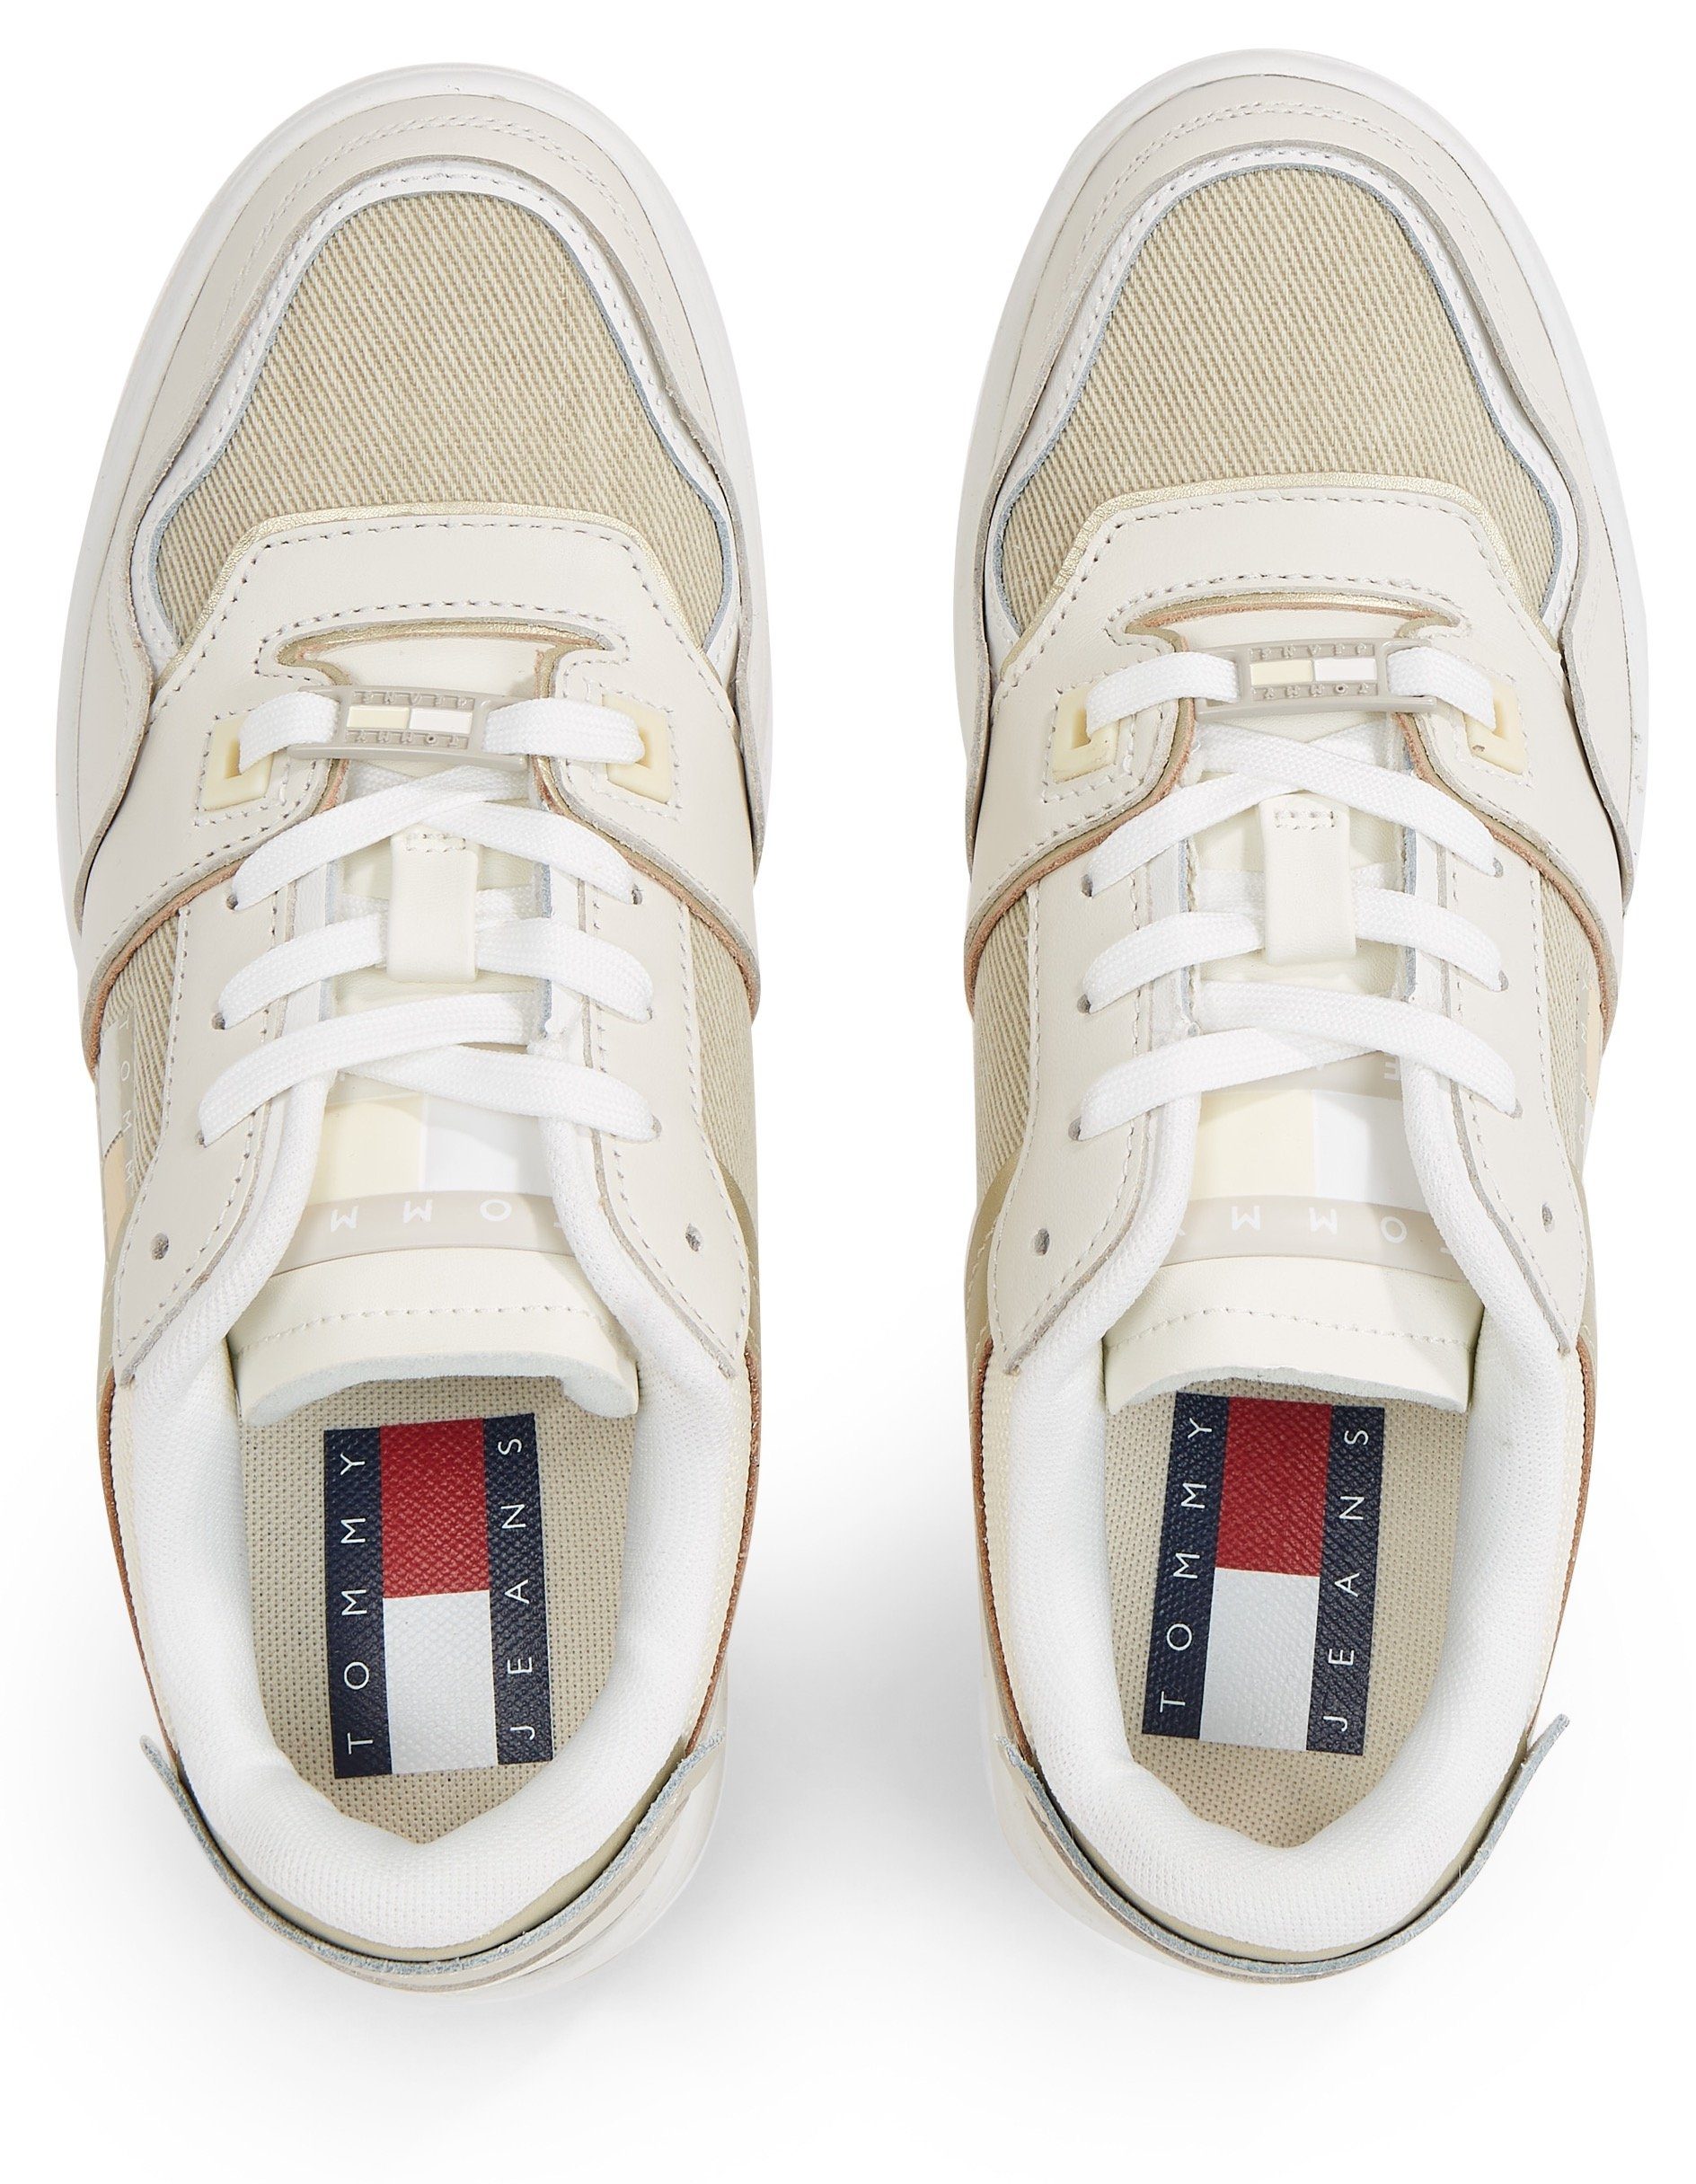 LC RETRO BASKET Tommy MIX Basket-Style Jeans im MATERIAL TJW Keilsneaker